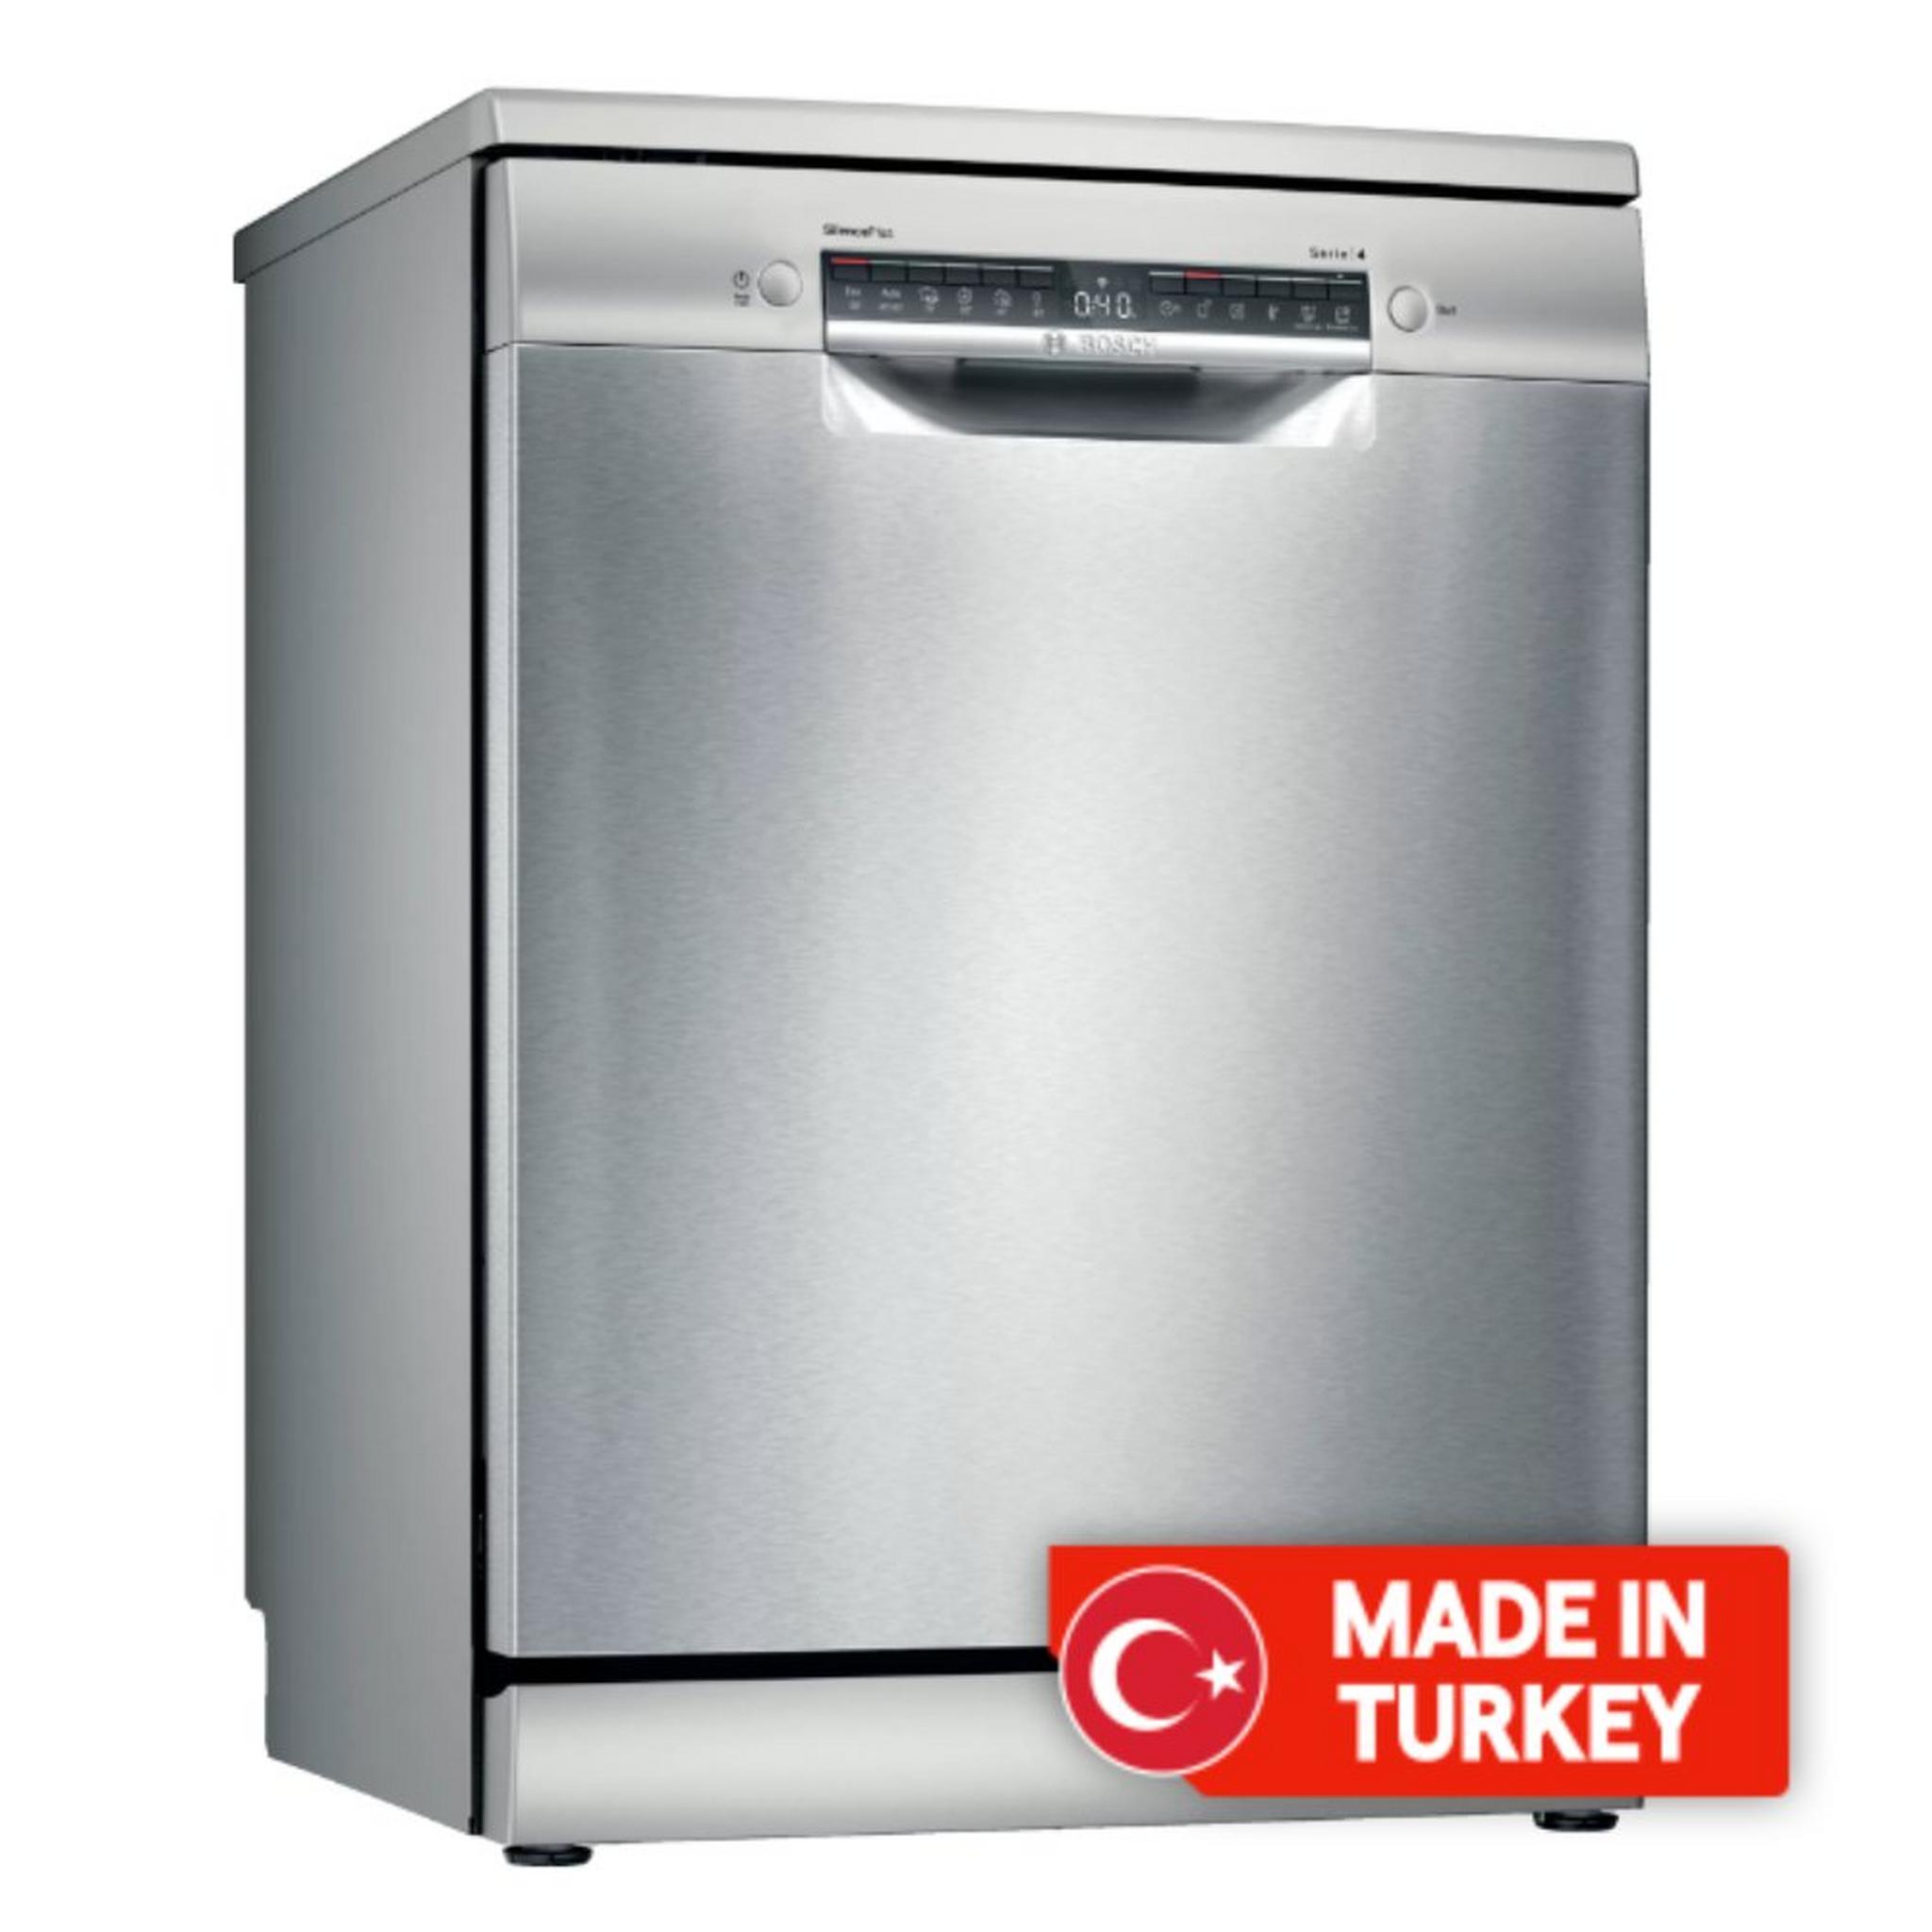 BOSCH Series 4 Free-Standing Dishwasher, 6 Programs,13 Places Setting, SMS4HMI26M - Silver Inox